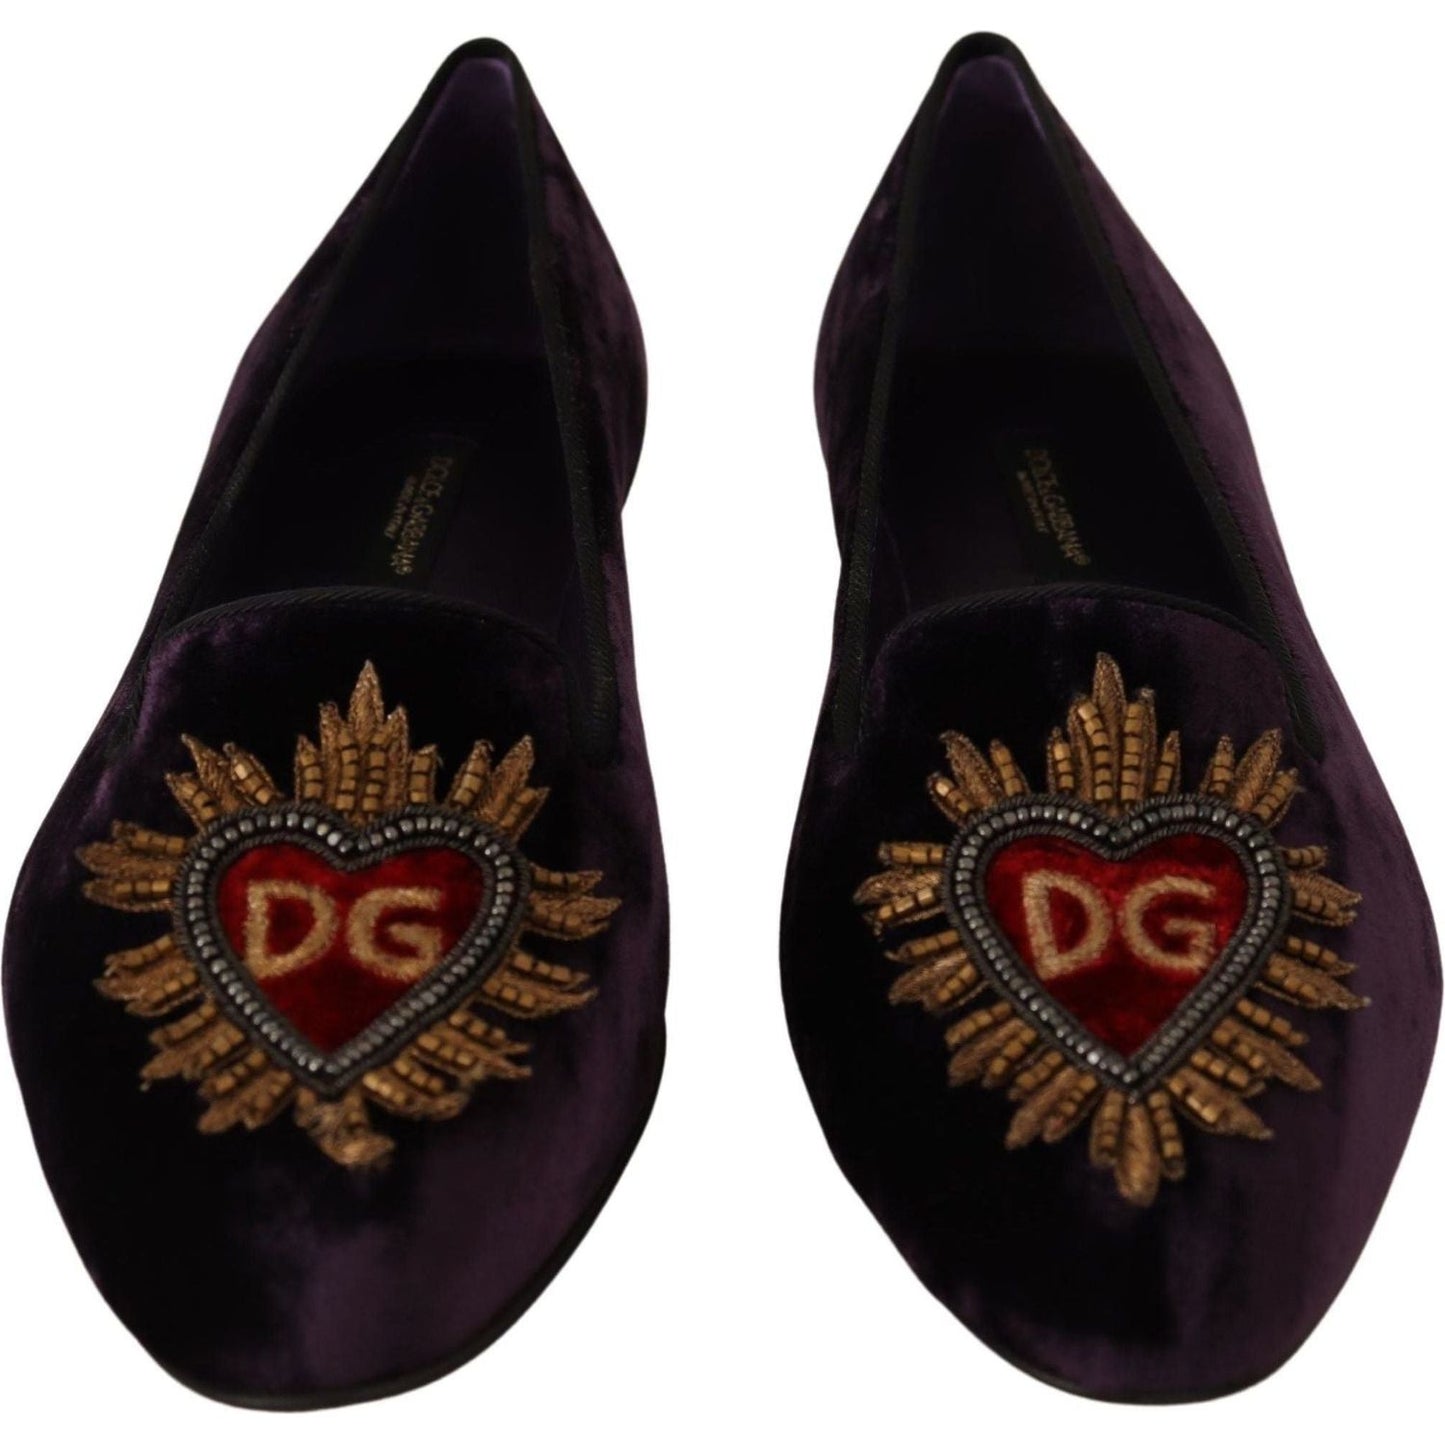 Dolce & Gabbana Chic Purple Velvet Loafers with Heart Detail purple-velvet-dg-heart-loafers-flats-shoes IMG_6015-ebb91f63-bc3.jpg